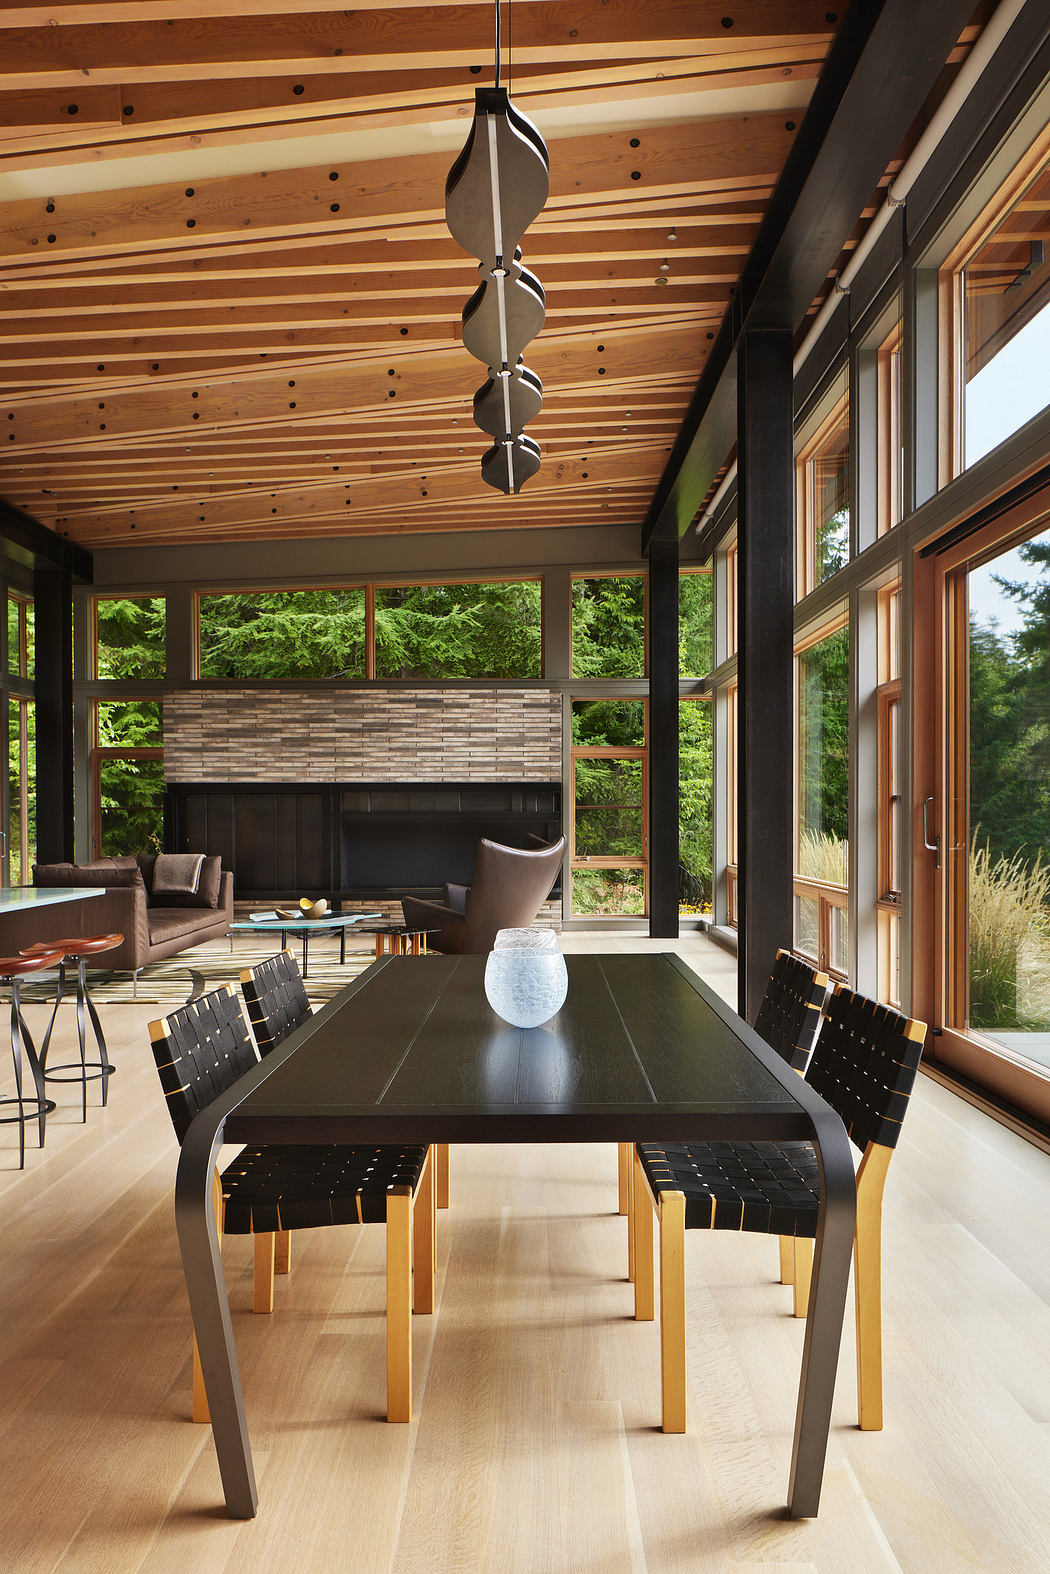 Modern dining room with wooden ceiling, large windows, and a sleek table.